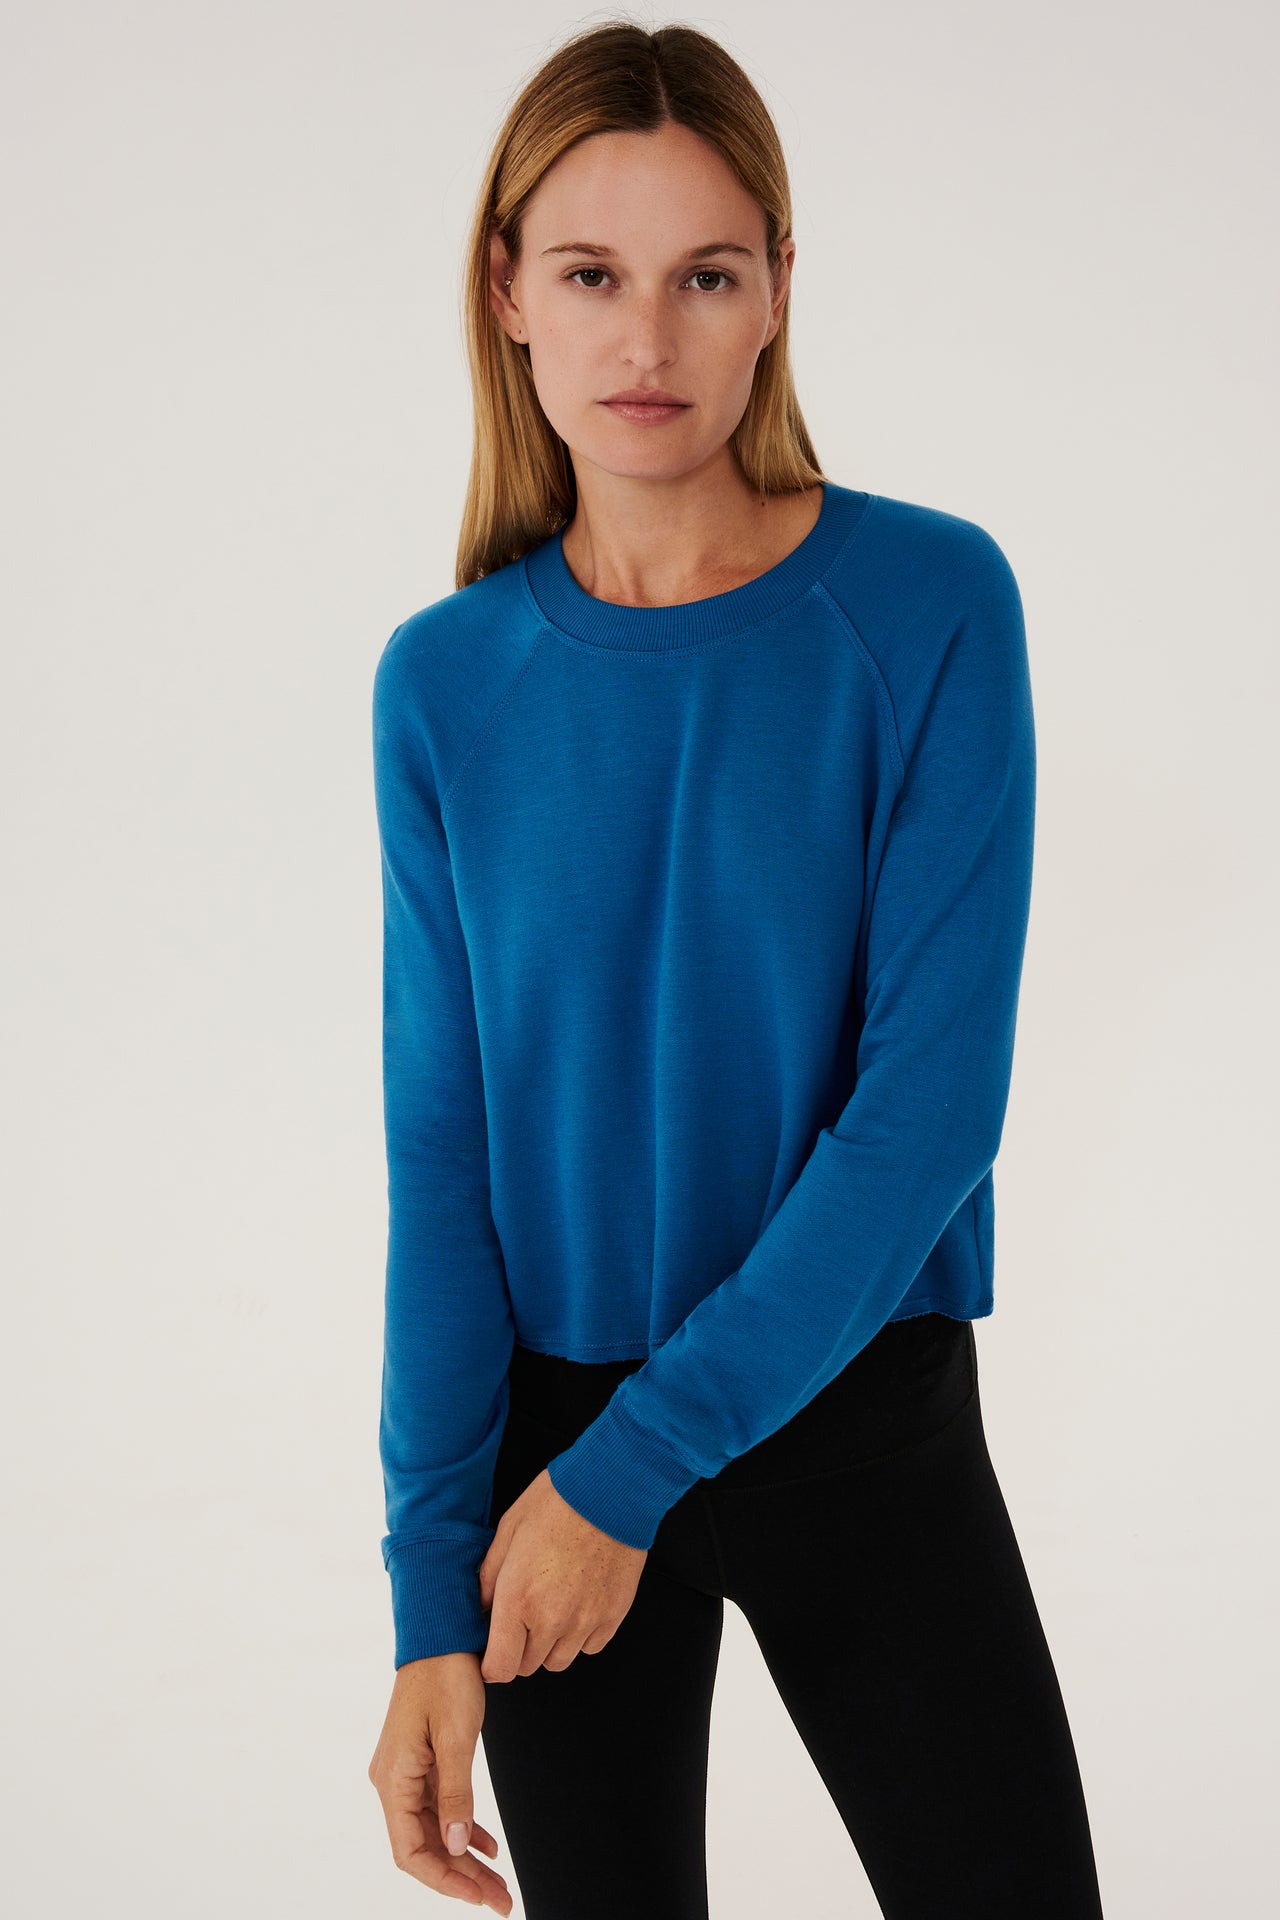 Front view of woman with dark blonde hair, wearing  bright  cropped blue sweatshirt with black leggings